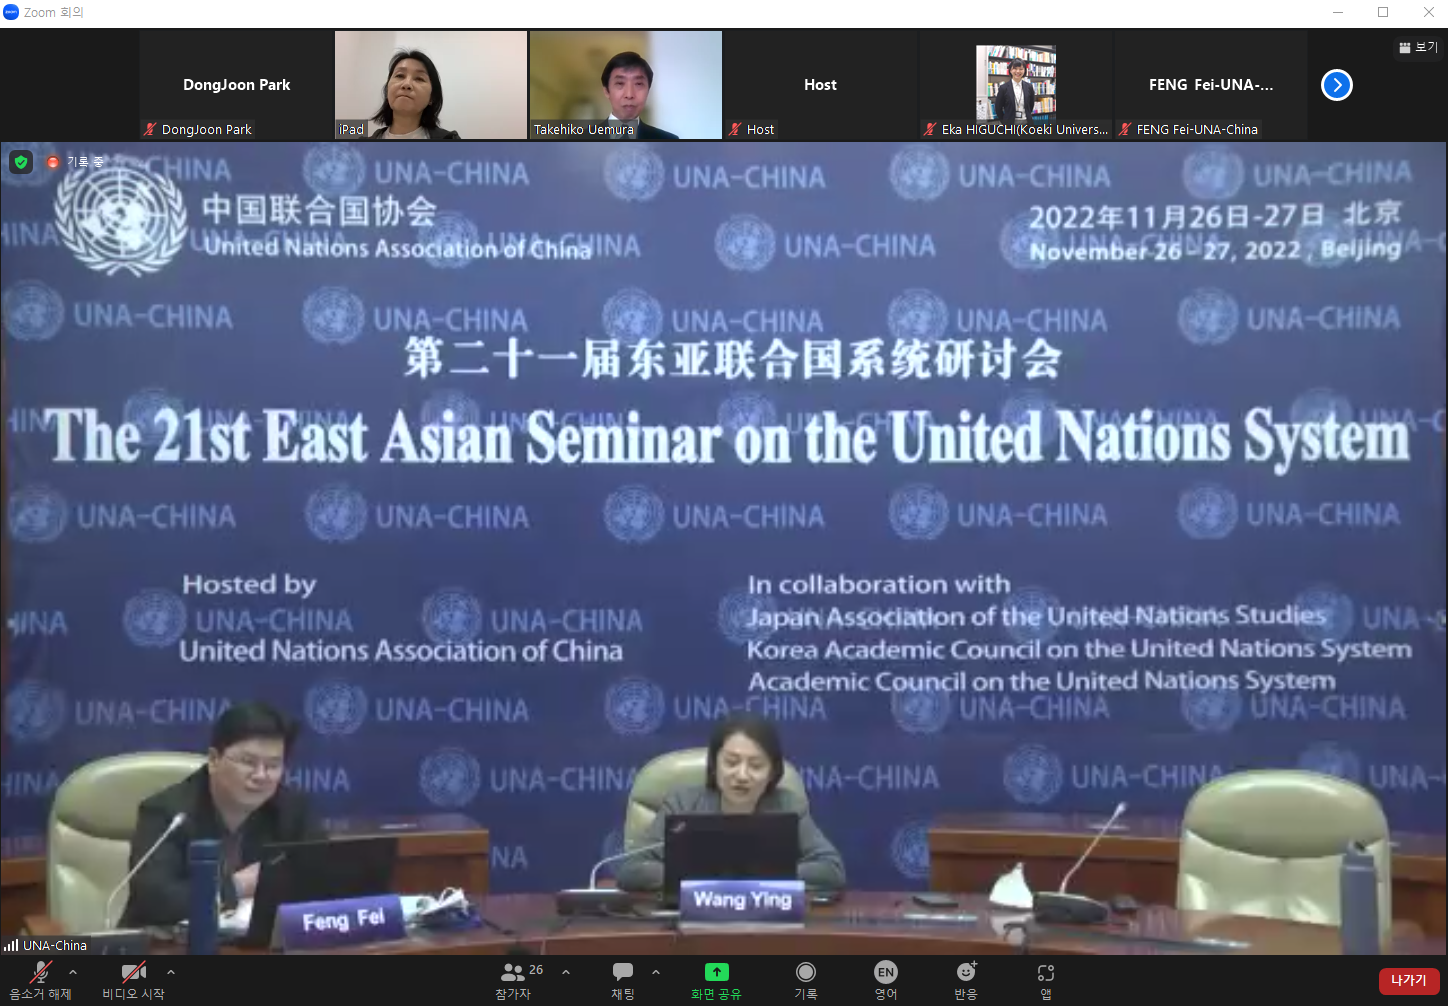 (2022) The 21st East Asian Seminar on the UN System